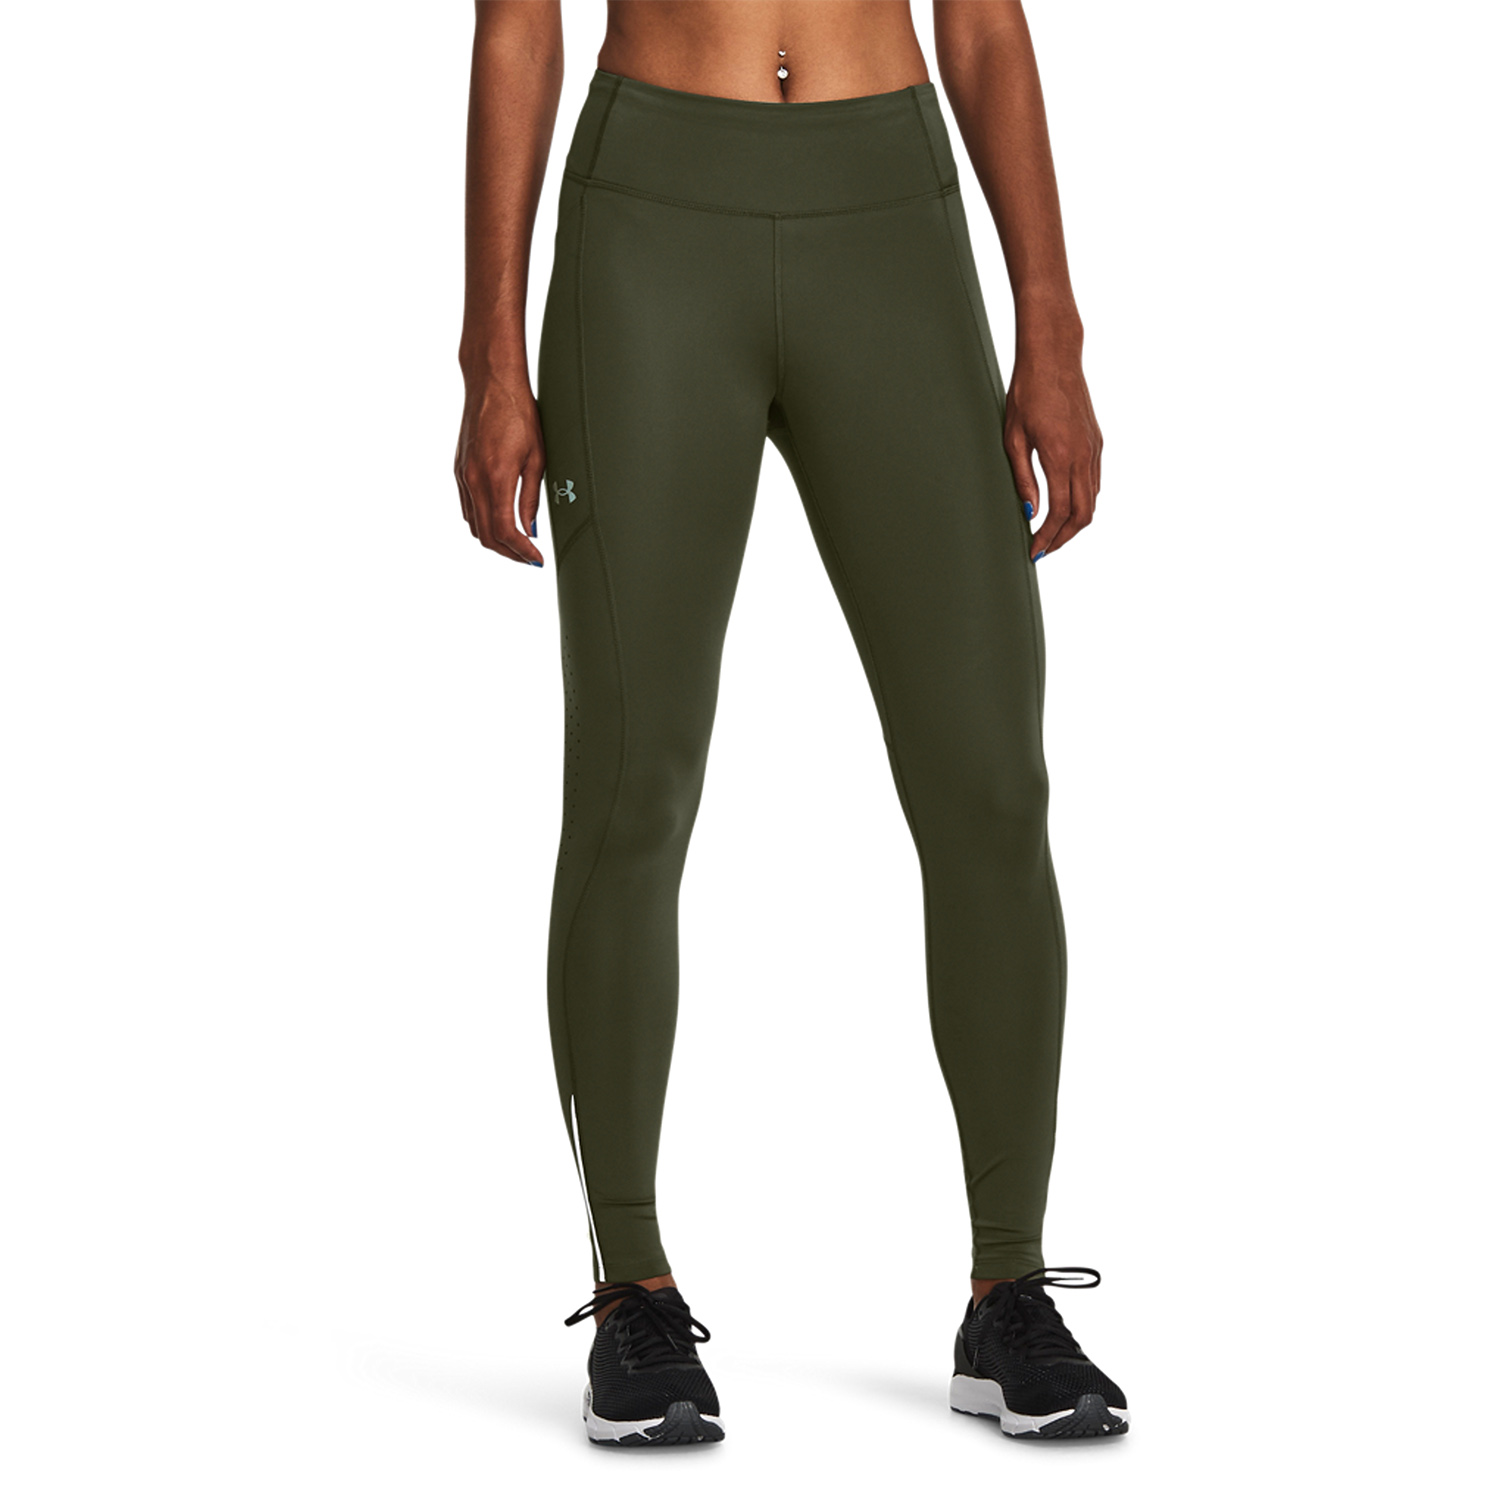 Under Armour Fly Fast 3.0 Tights - Marine Od Green/Black